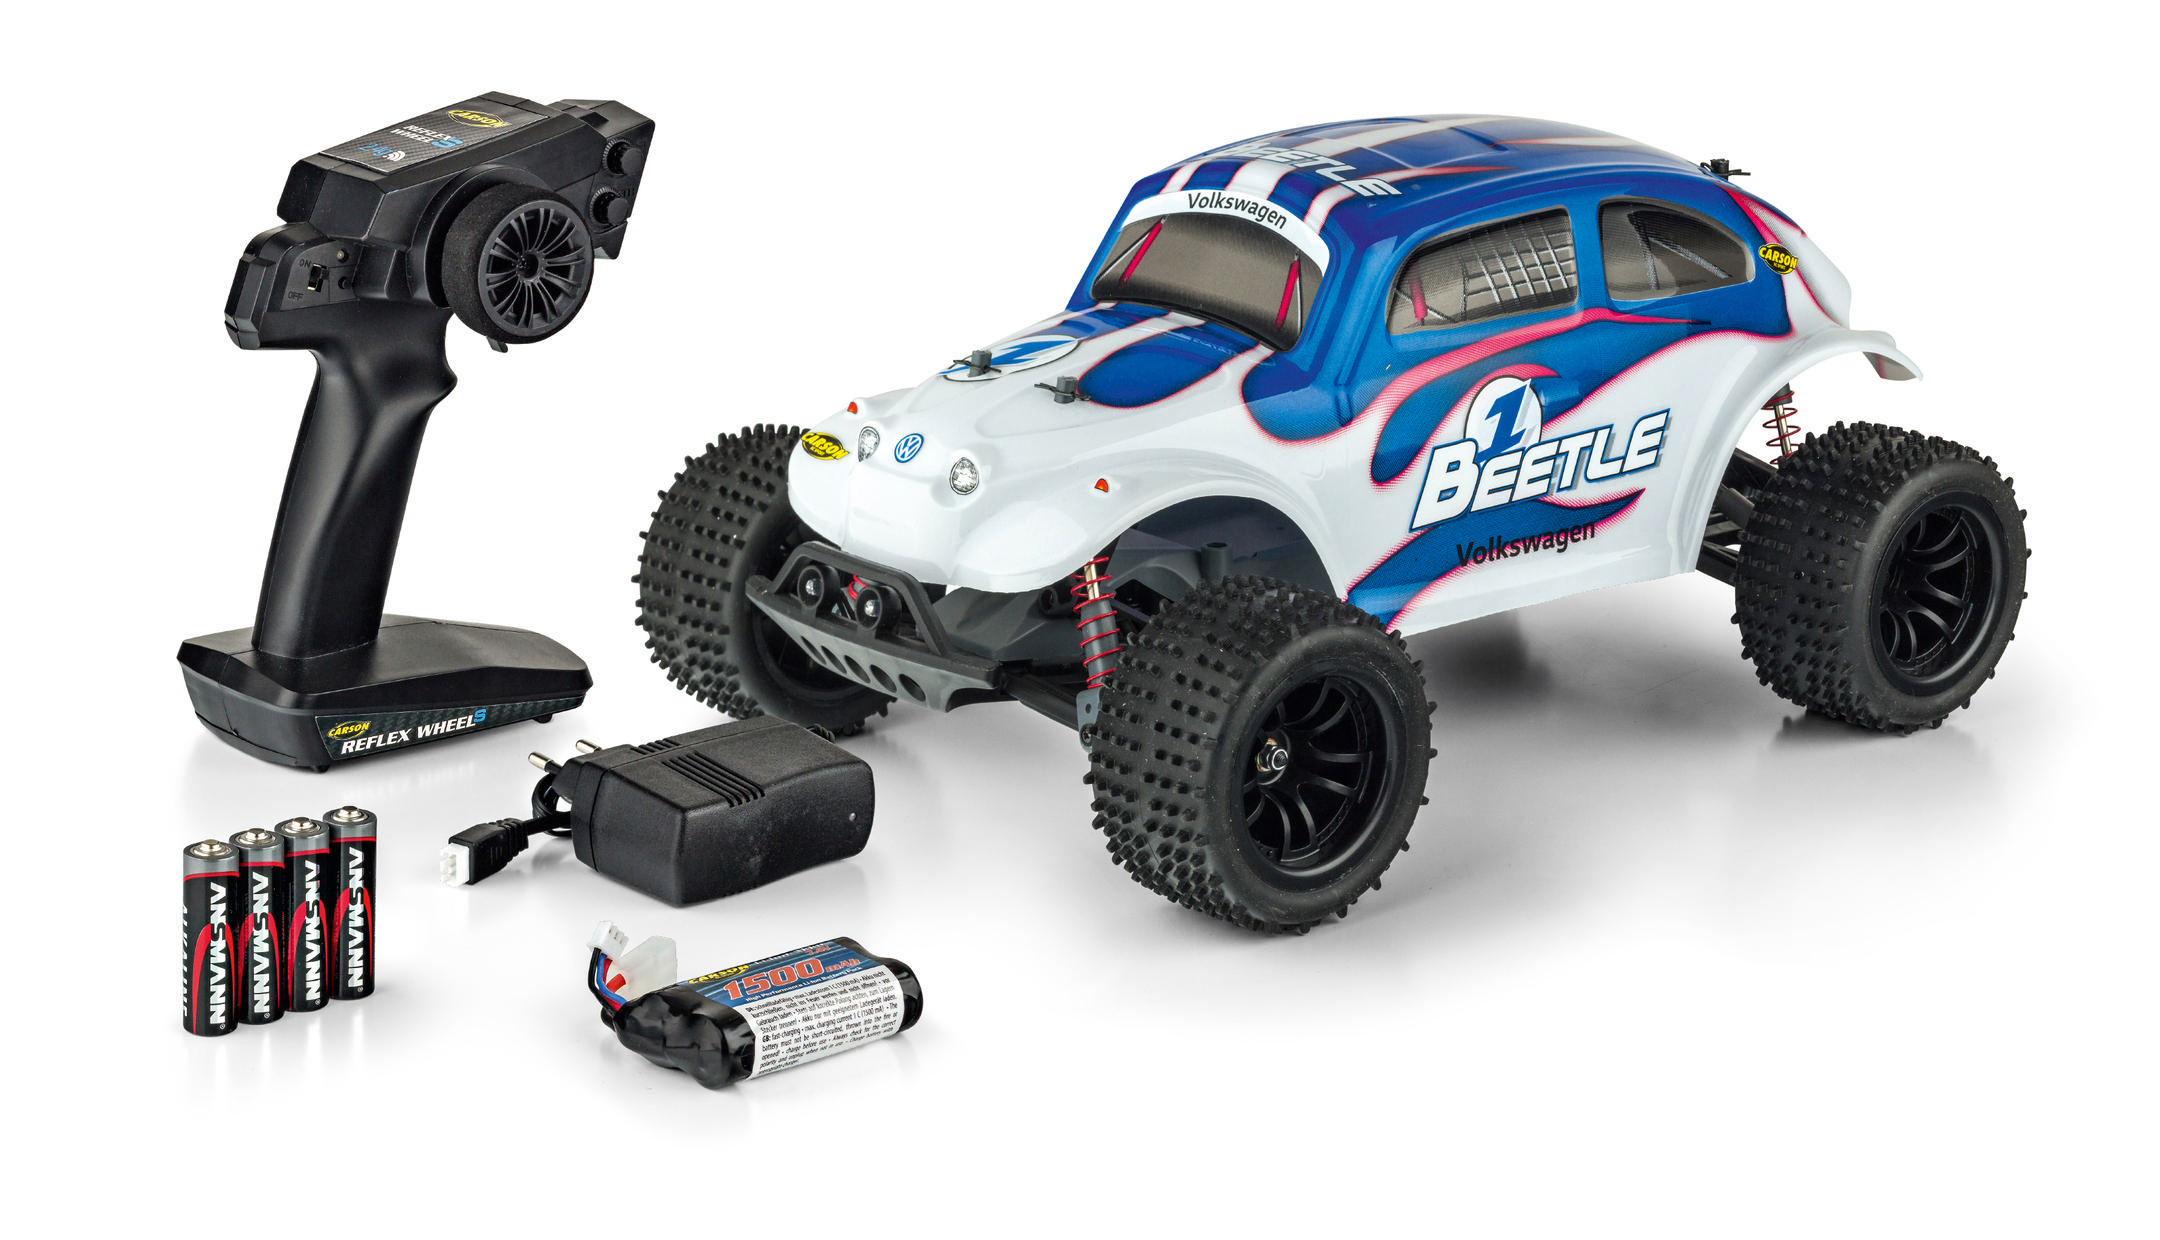 CARSON 1:10 VW Beetle FE RTR Spielzeugmodell, Mehrfarbig 2.4G 100